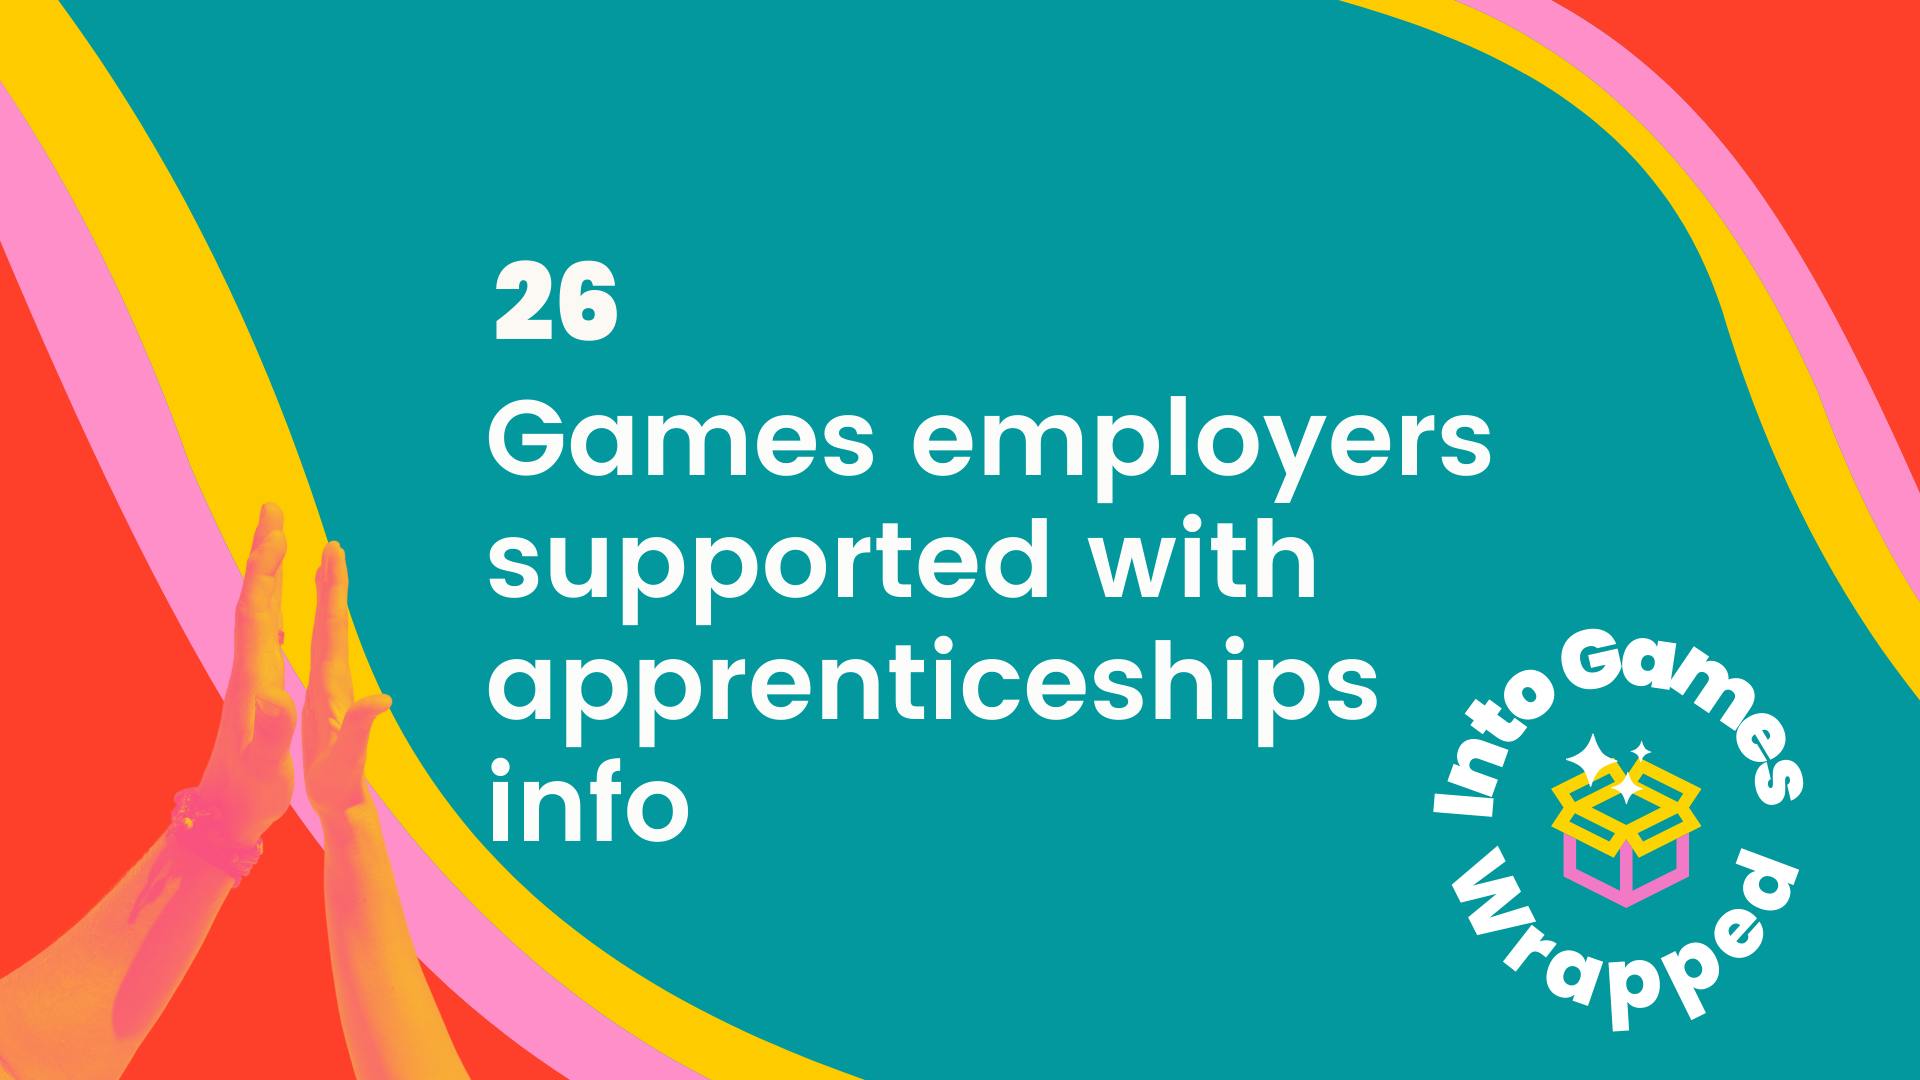 26 games employers supported with apprenticeships info